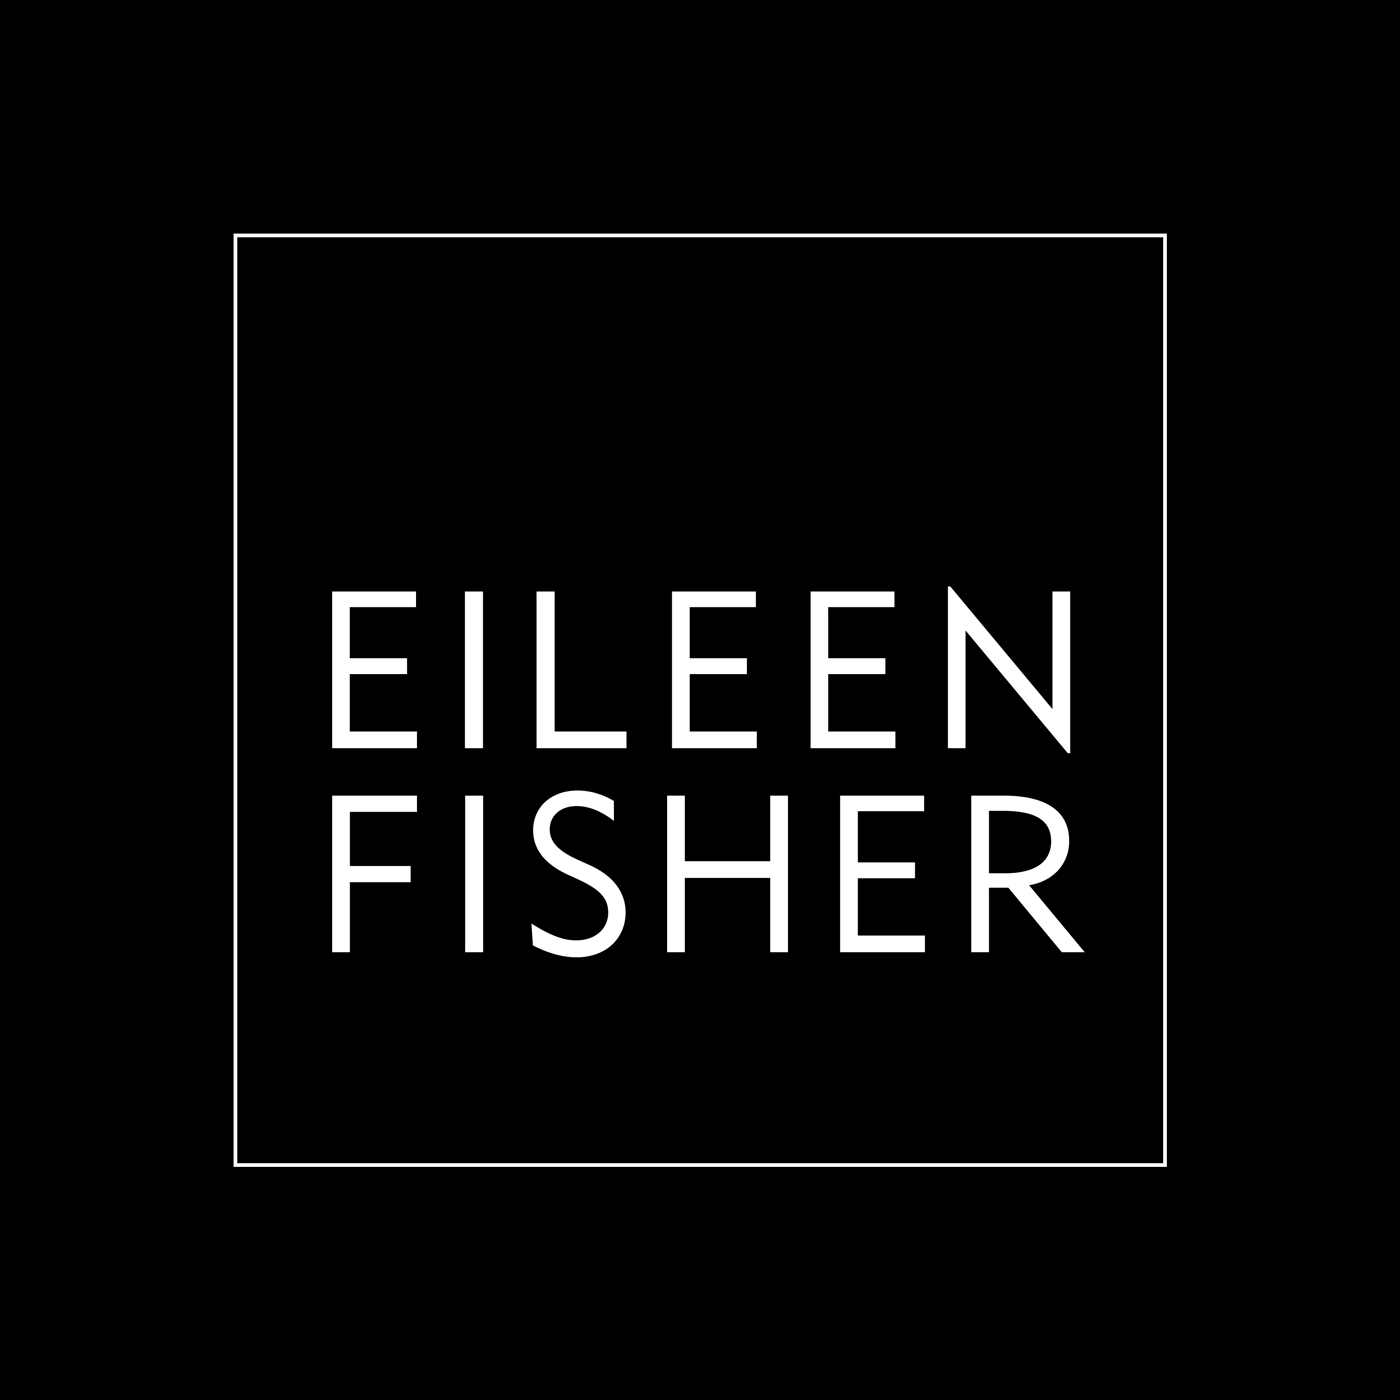 eileen-fisher-logo.png